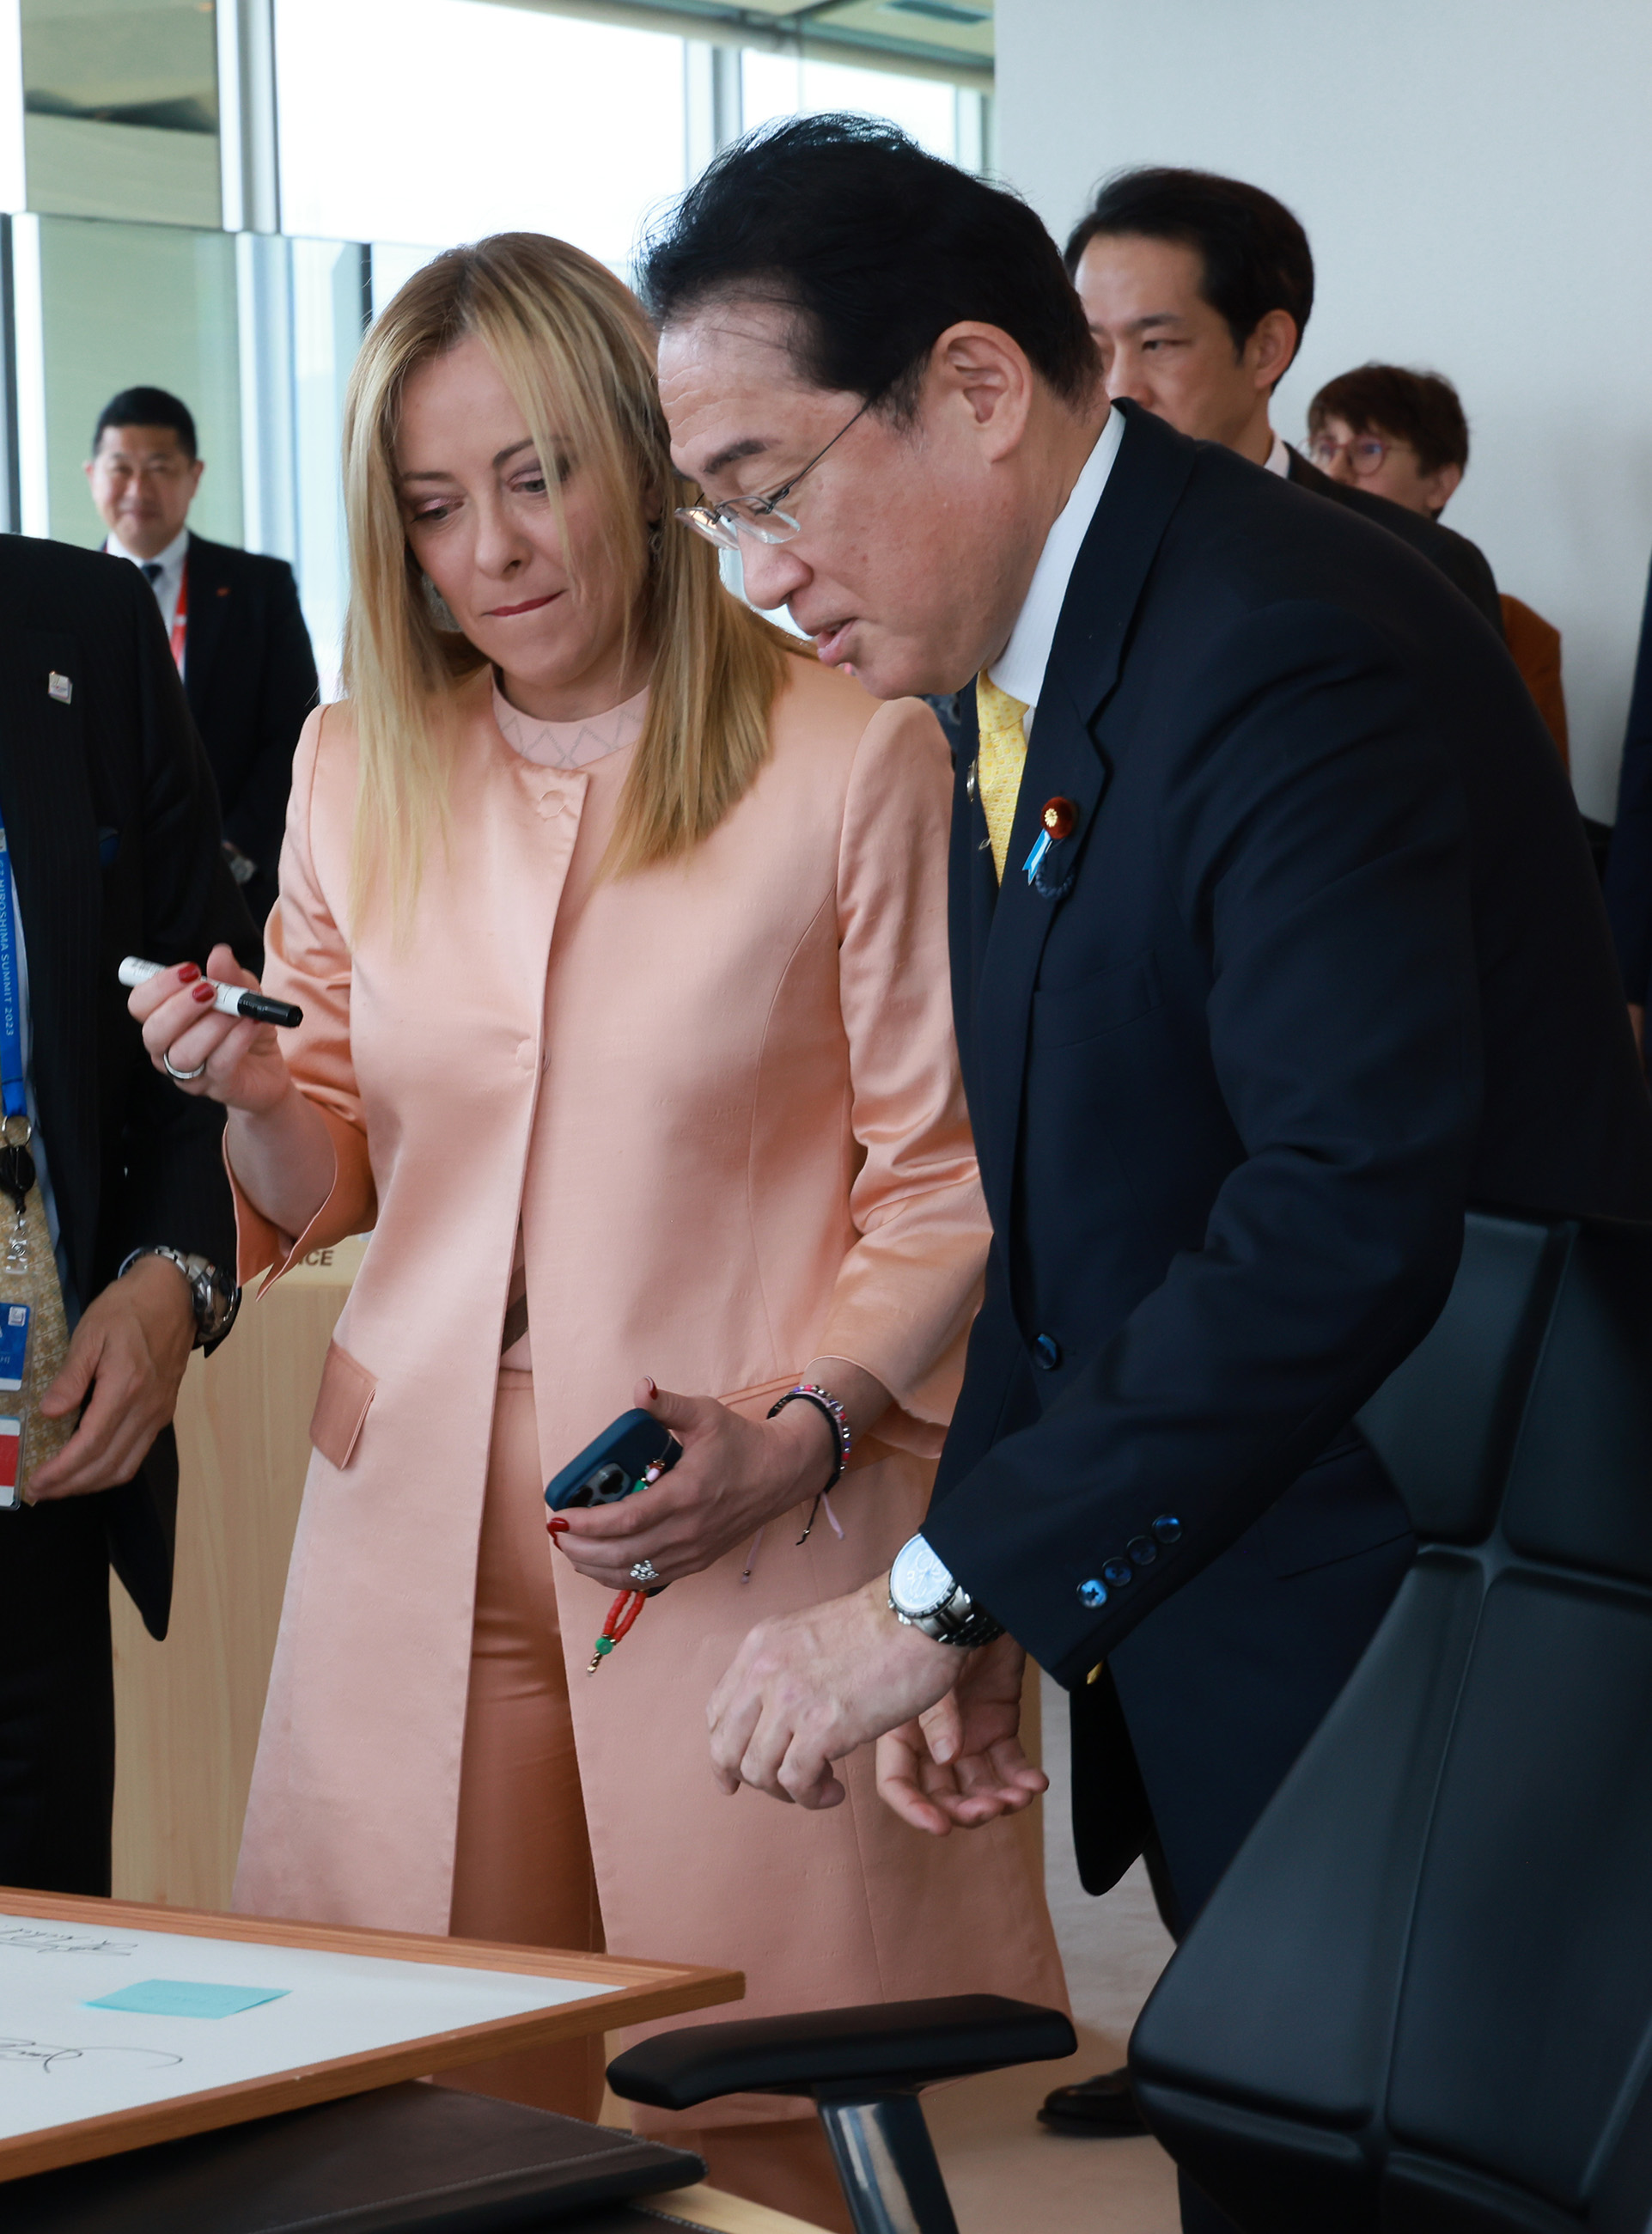 Prime Minister Kishida interacting with other leaders (6)